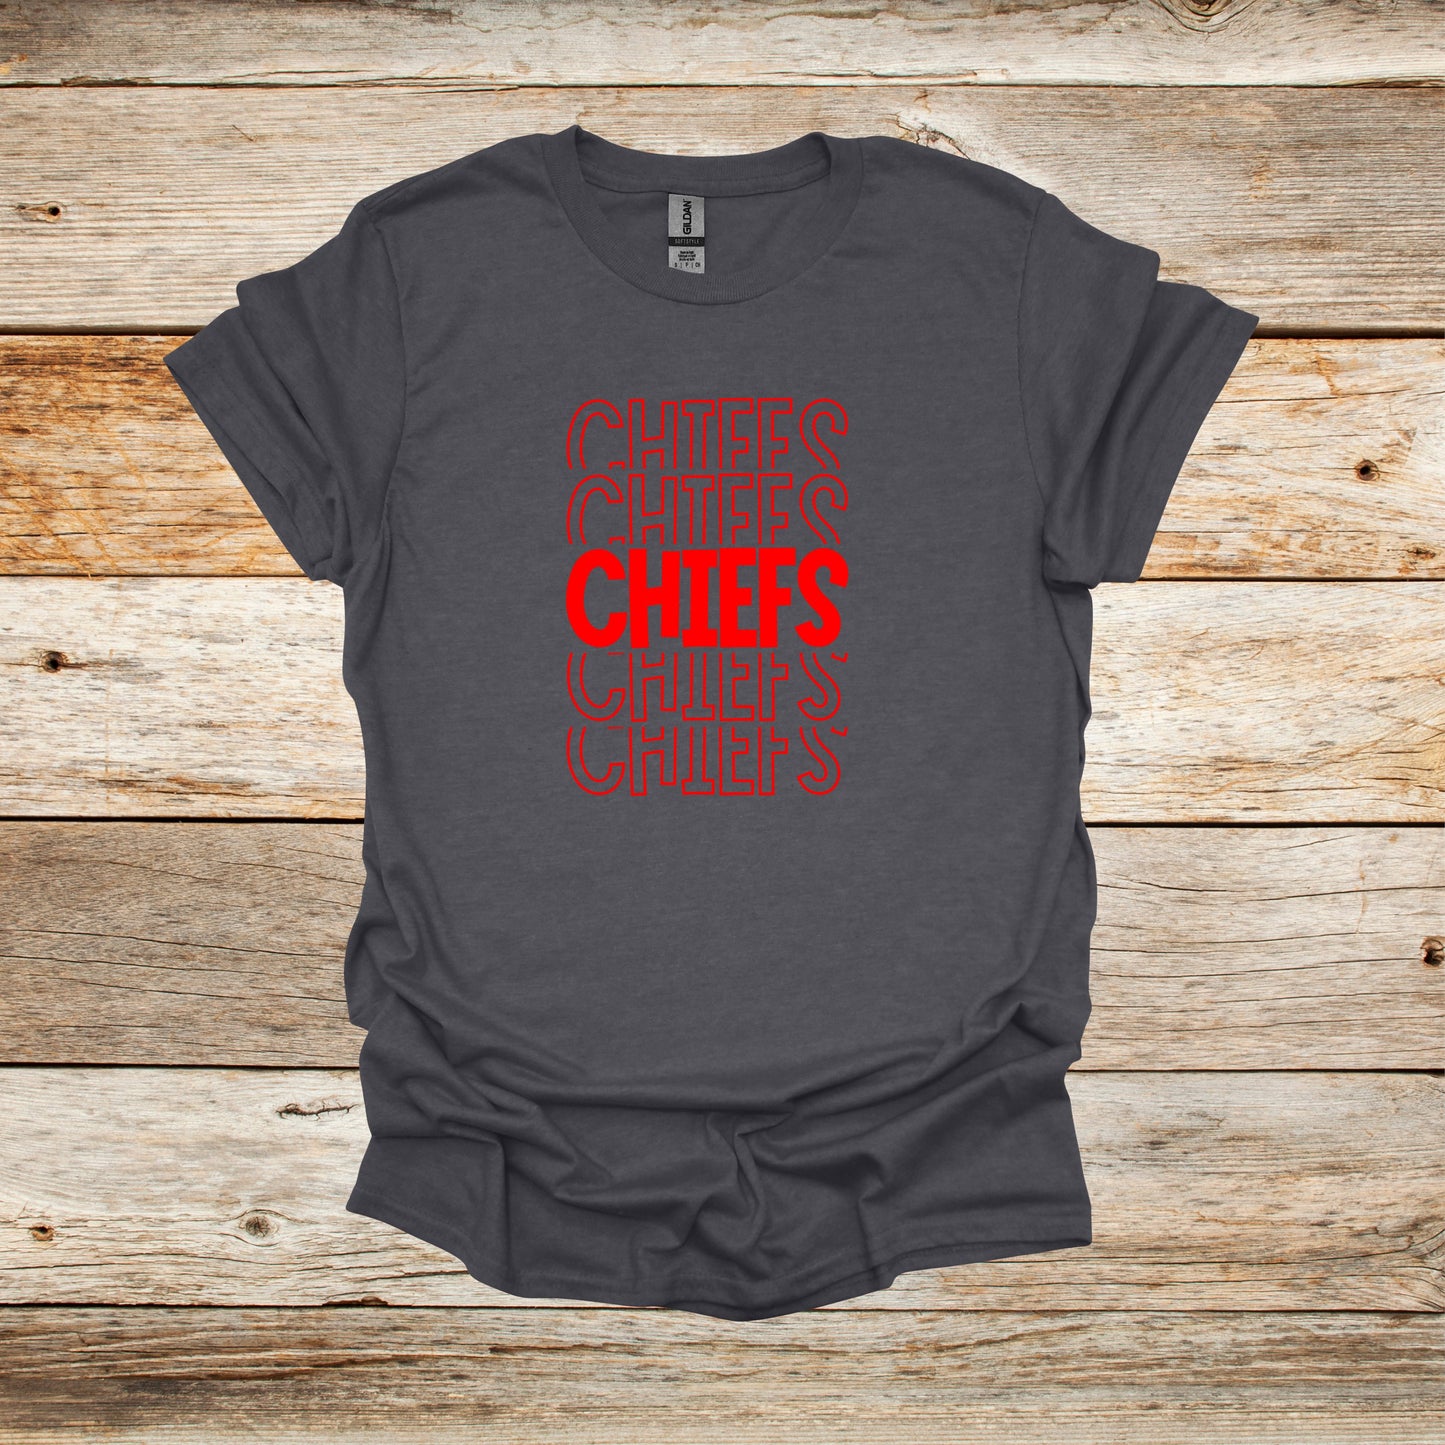 Football T-Shirt - Kansas City Chiefs - Chiefs - Adult and Children's Tee Shirts - Chiefs - Sports T-Shirts Graphic Avenue Dark Heather Adult Small 